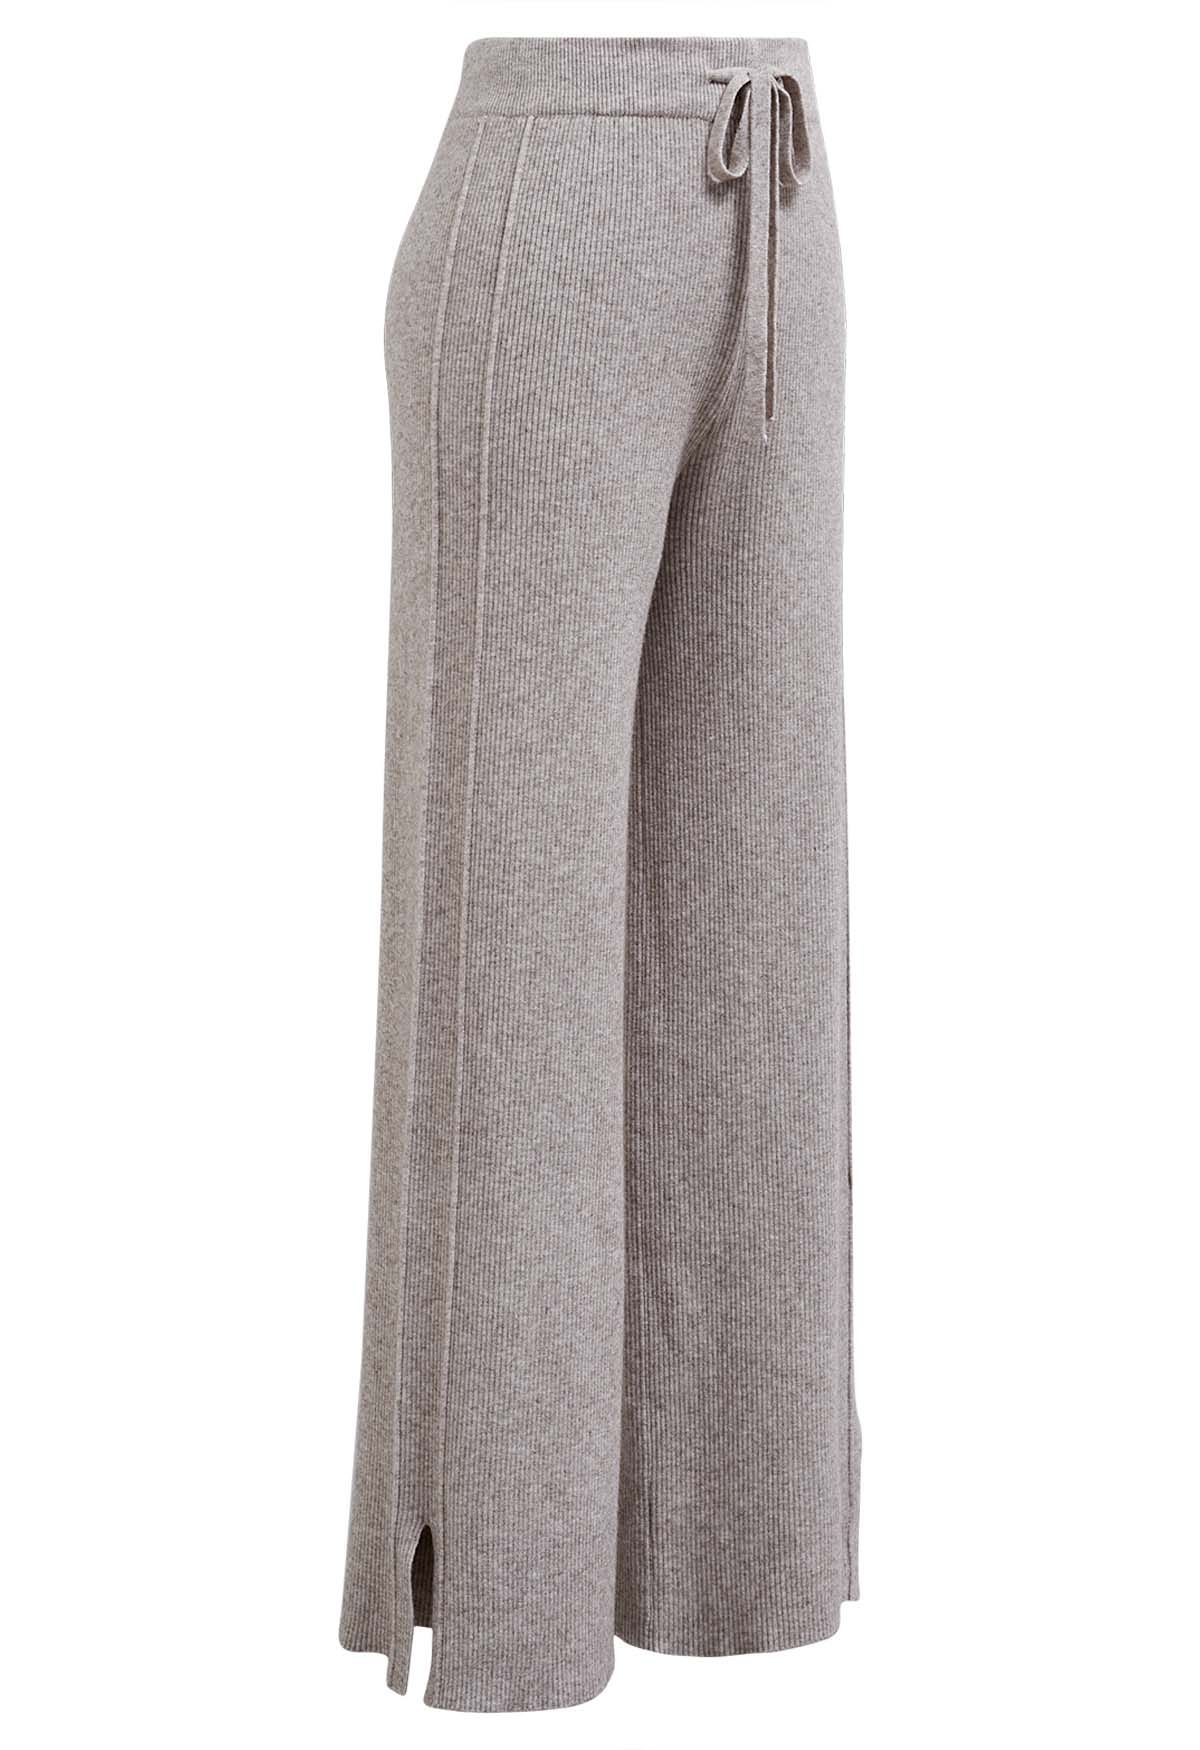 Drawstring Waist Side Slit Knit Pants in Taupe